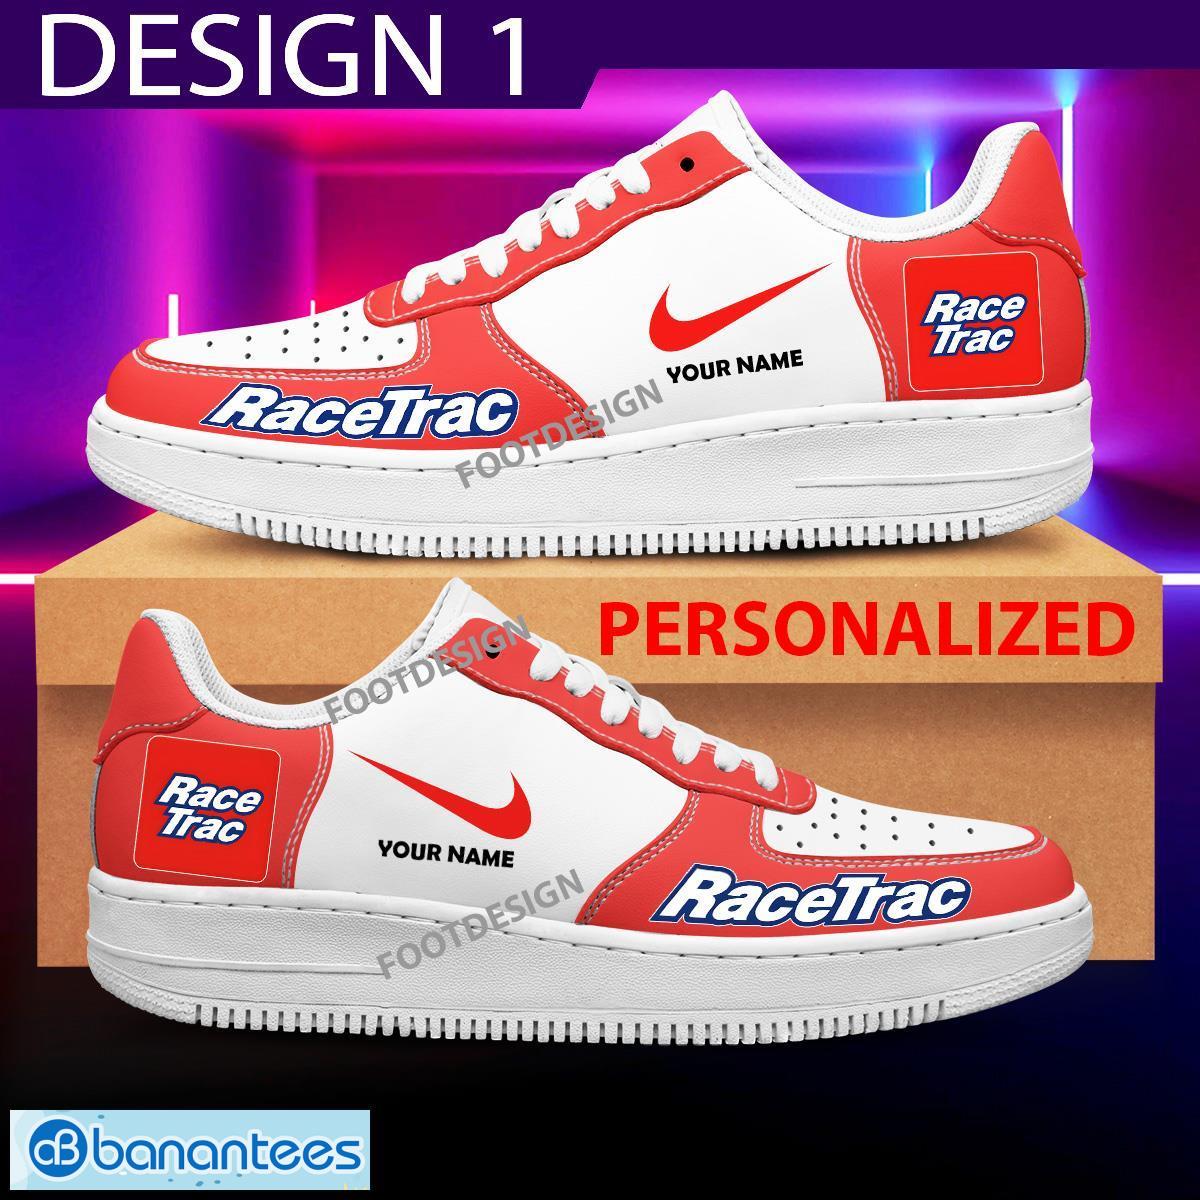 Custom Name Racetrac Brand Air Force 1 Sneakers New Pattern For Fans Gift AF1 Shoes - Brands Racetrac Air Force 1 Sneakers Custom Name Photo 1